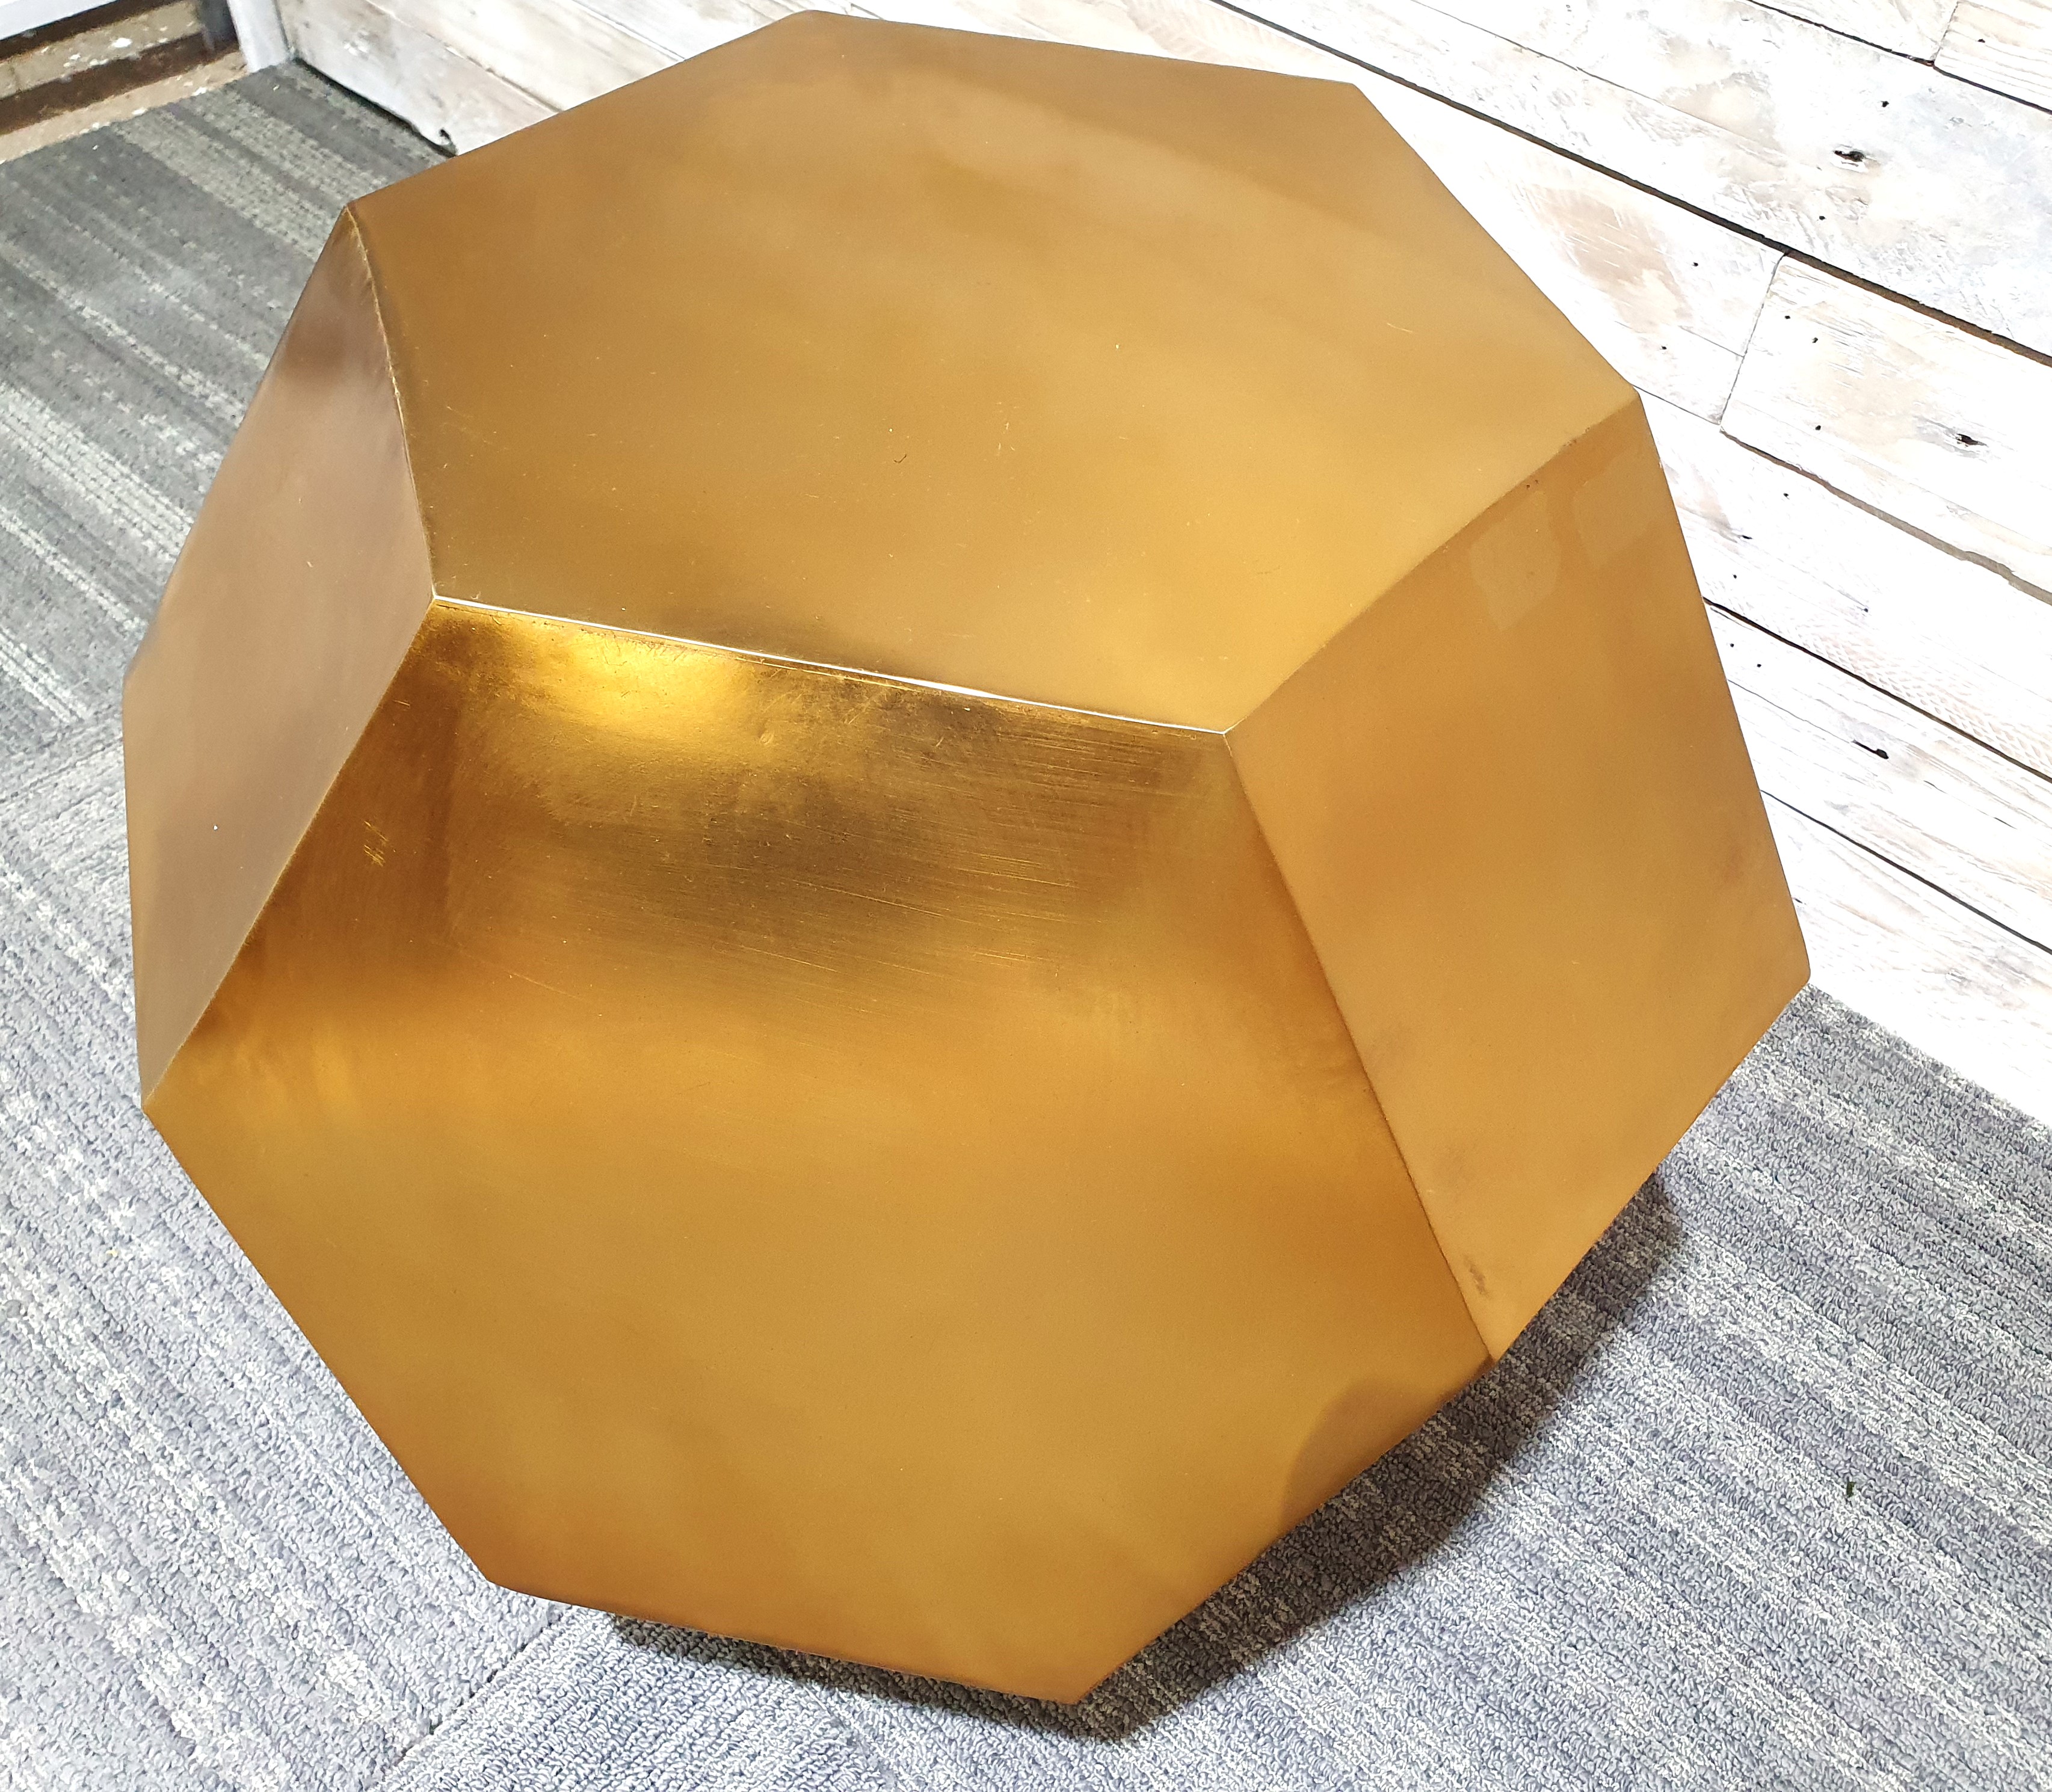 Designer Loaf.com Gold Coloured Metal Dodecagon Side Table 50cm Tall x 55cm Across. Rrp £199 - Image 3 of 3